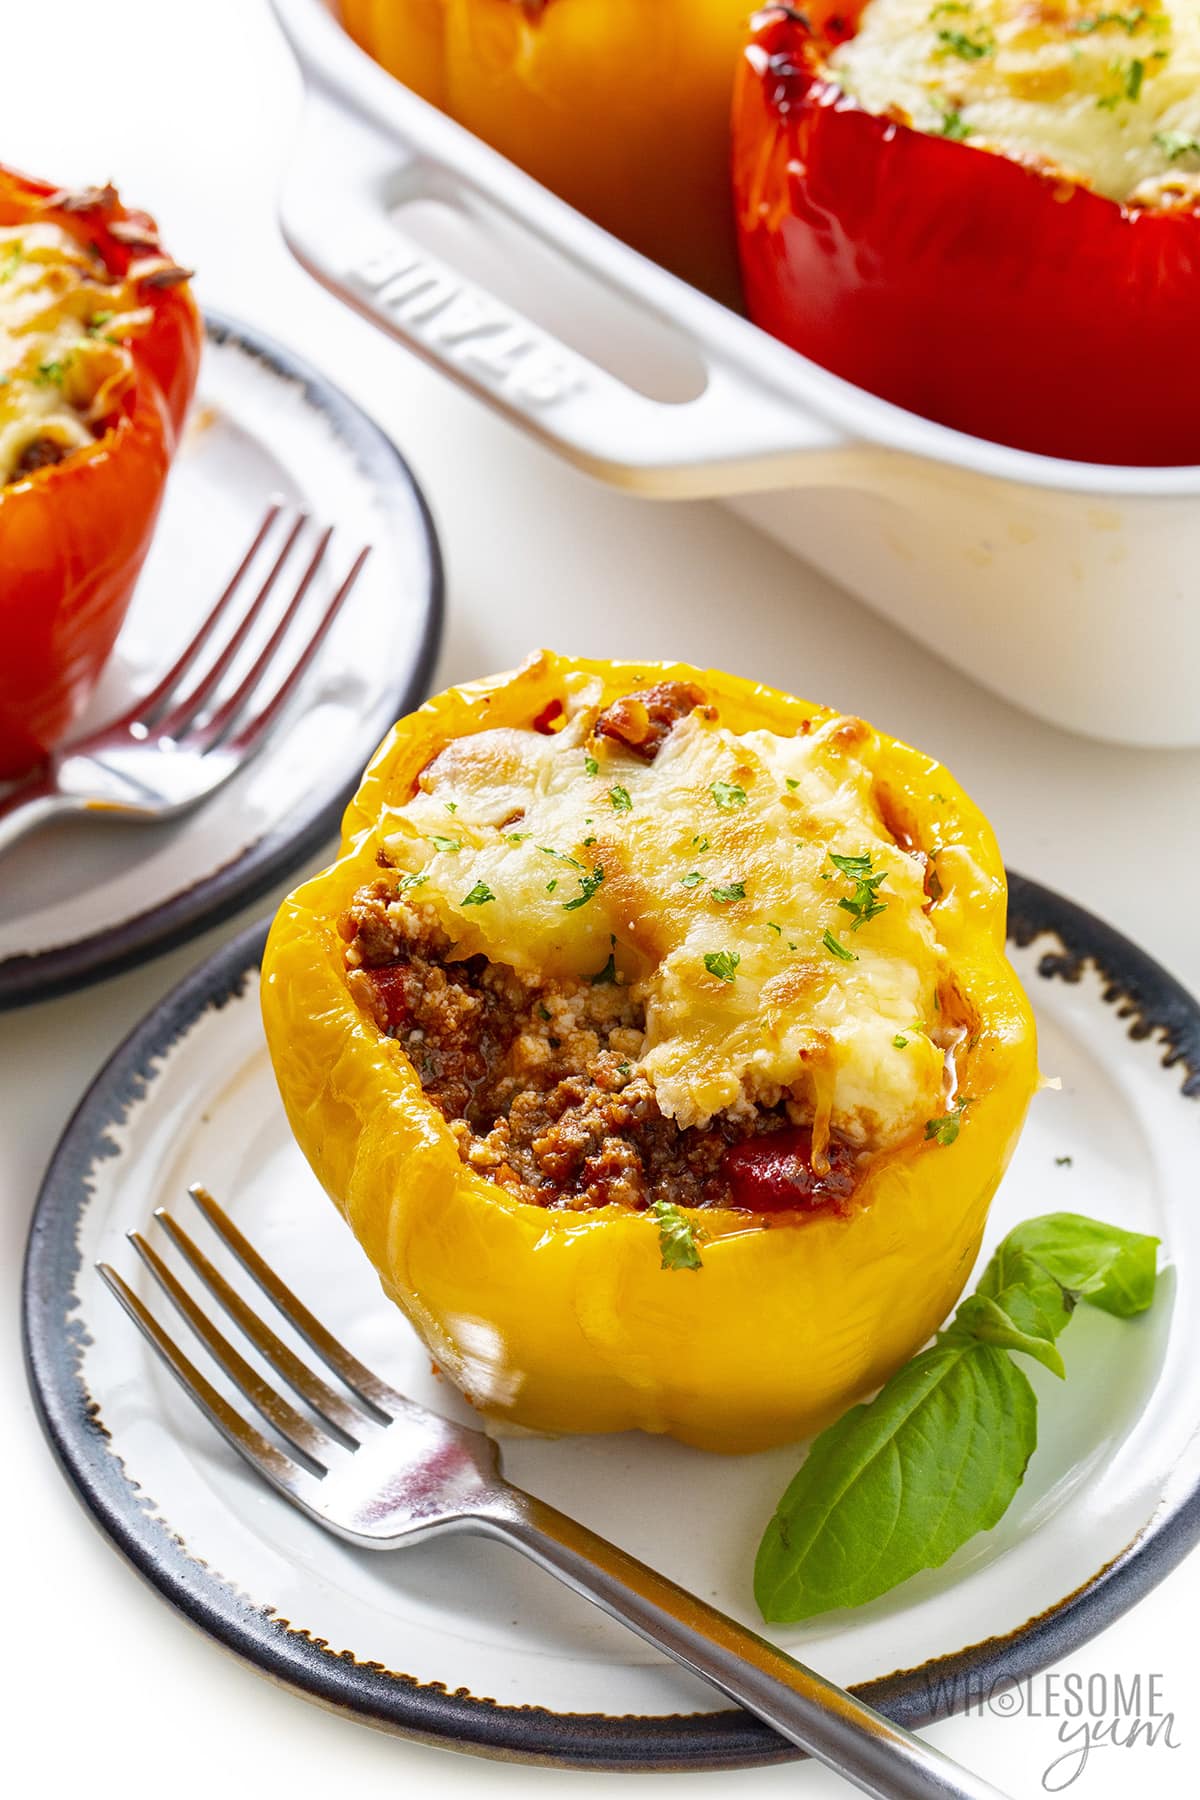 Low carb stuffed peppers with basil garnish.